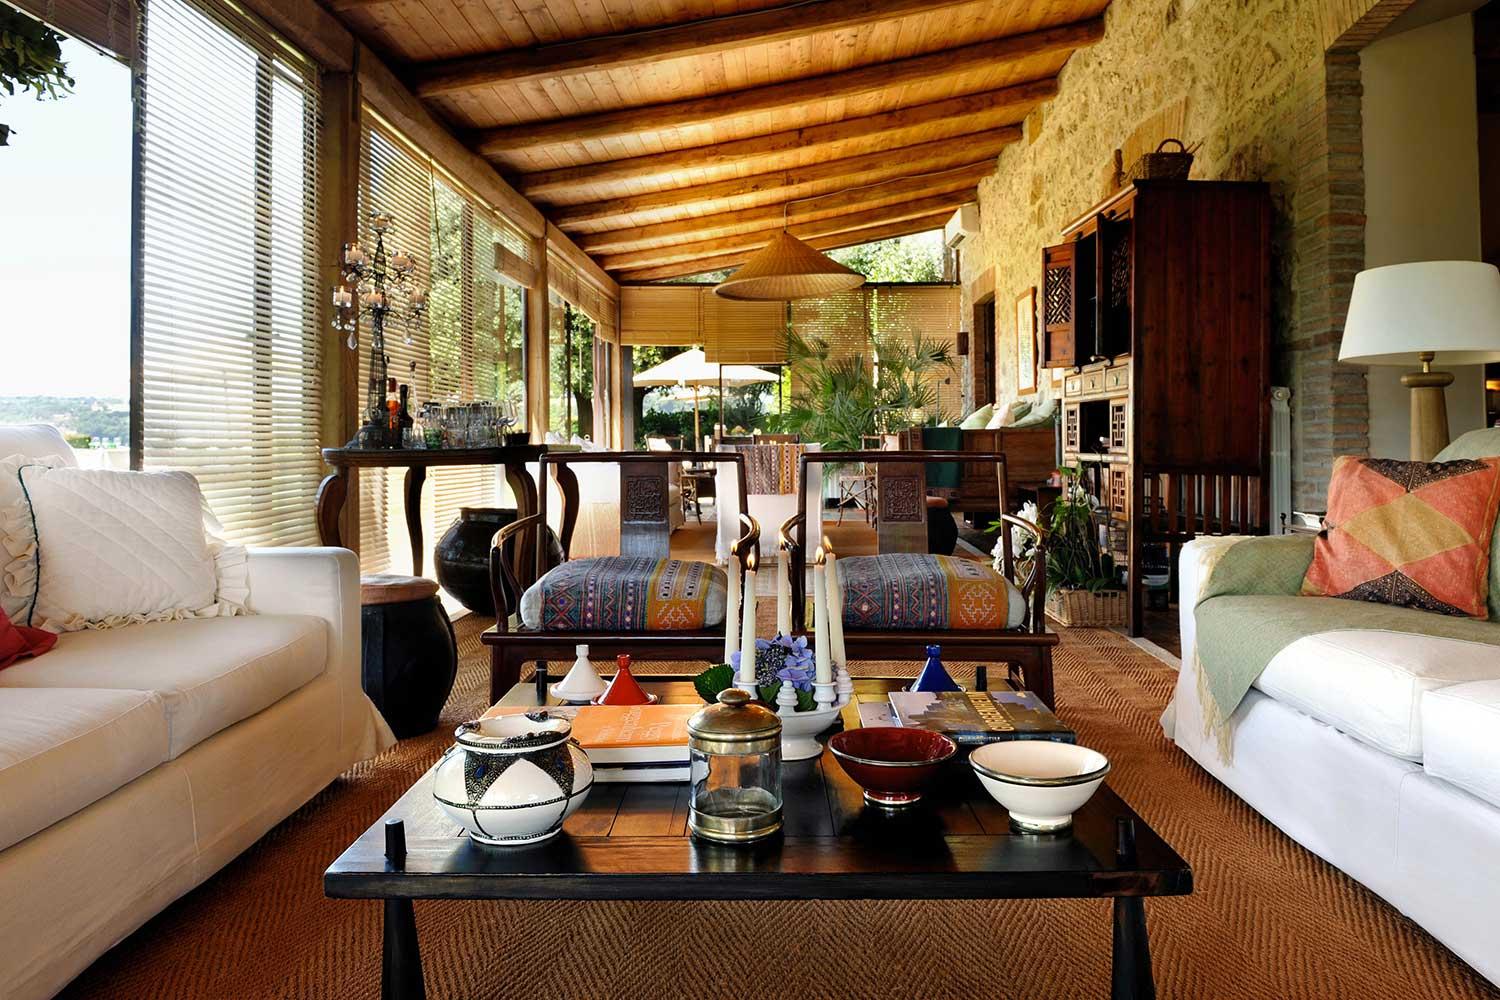 The living room of a luxury accommodation in Umbria.